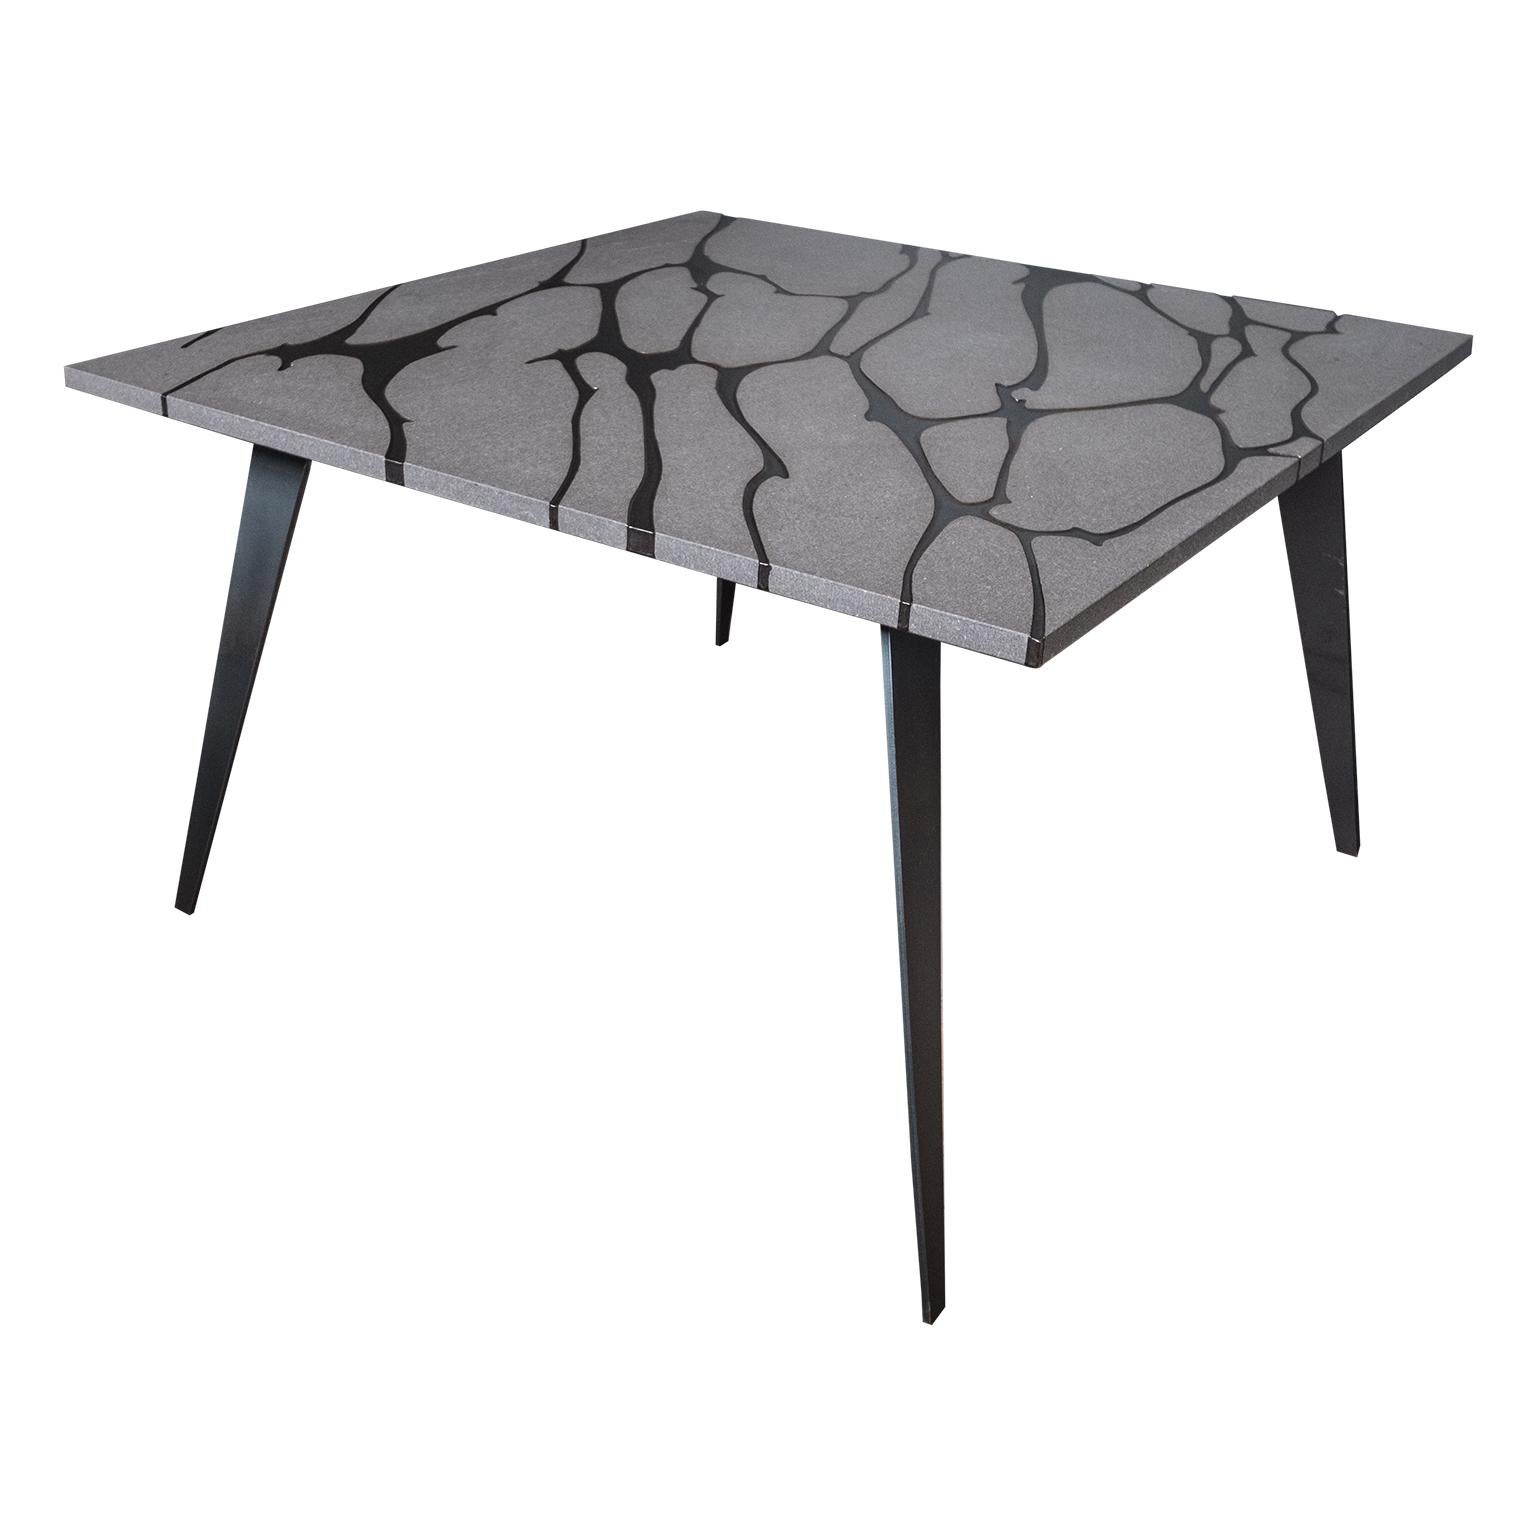 Filodifumo is a contemporary square outdoor table with top in lava stone and steel legs.
It is made with solid and compact matter.
High precision machinaries engrave on the lava stone surface 